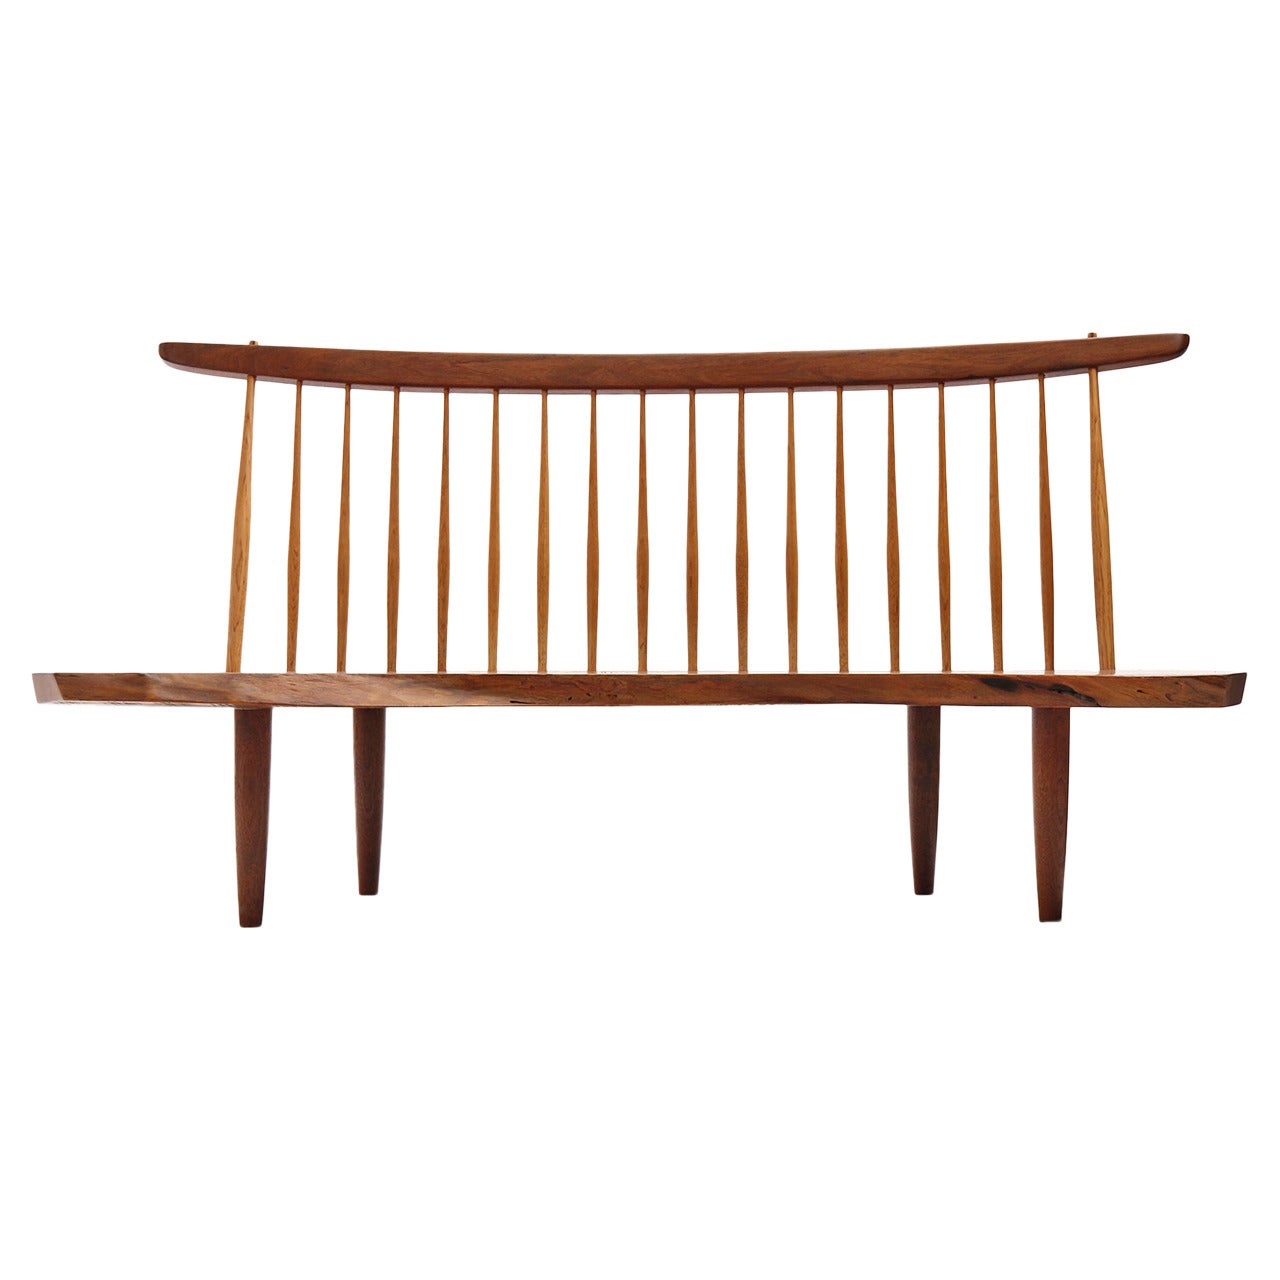 Superb Conoid Bench by George Nakashima